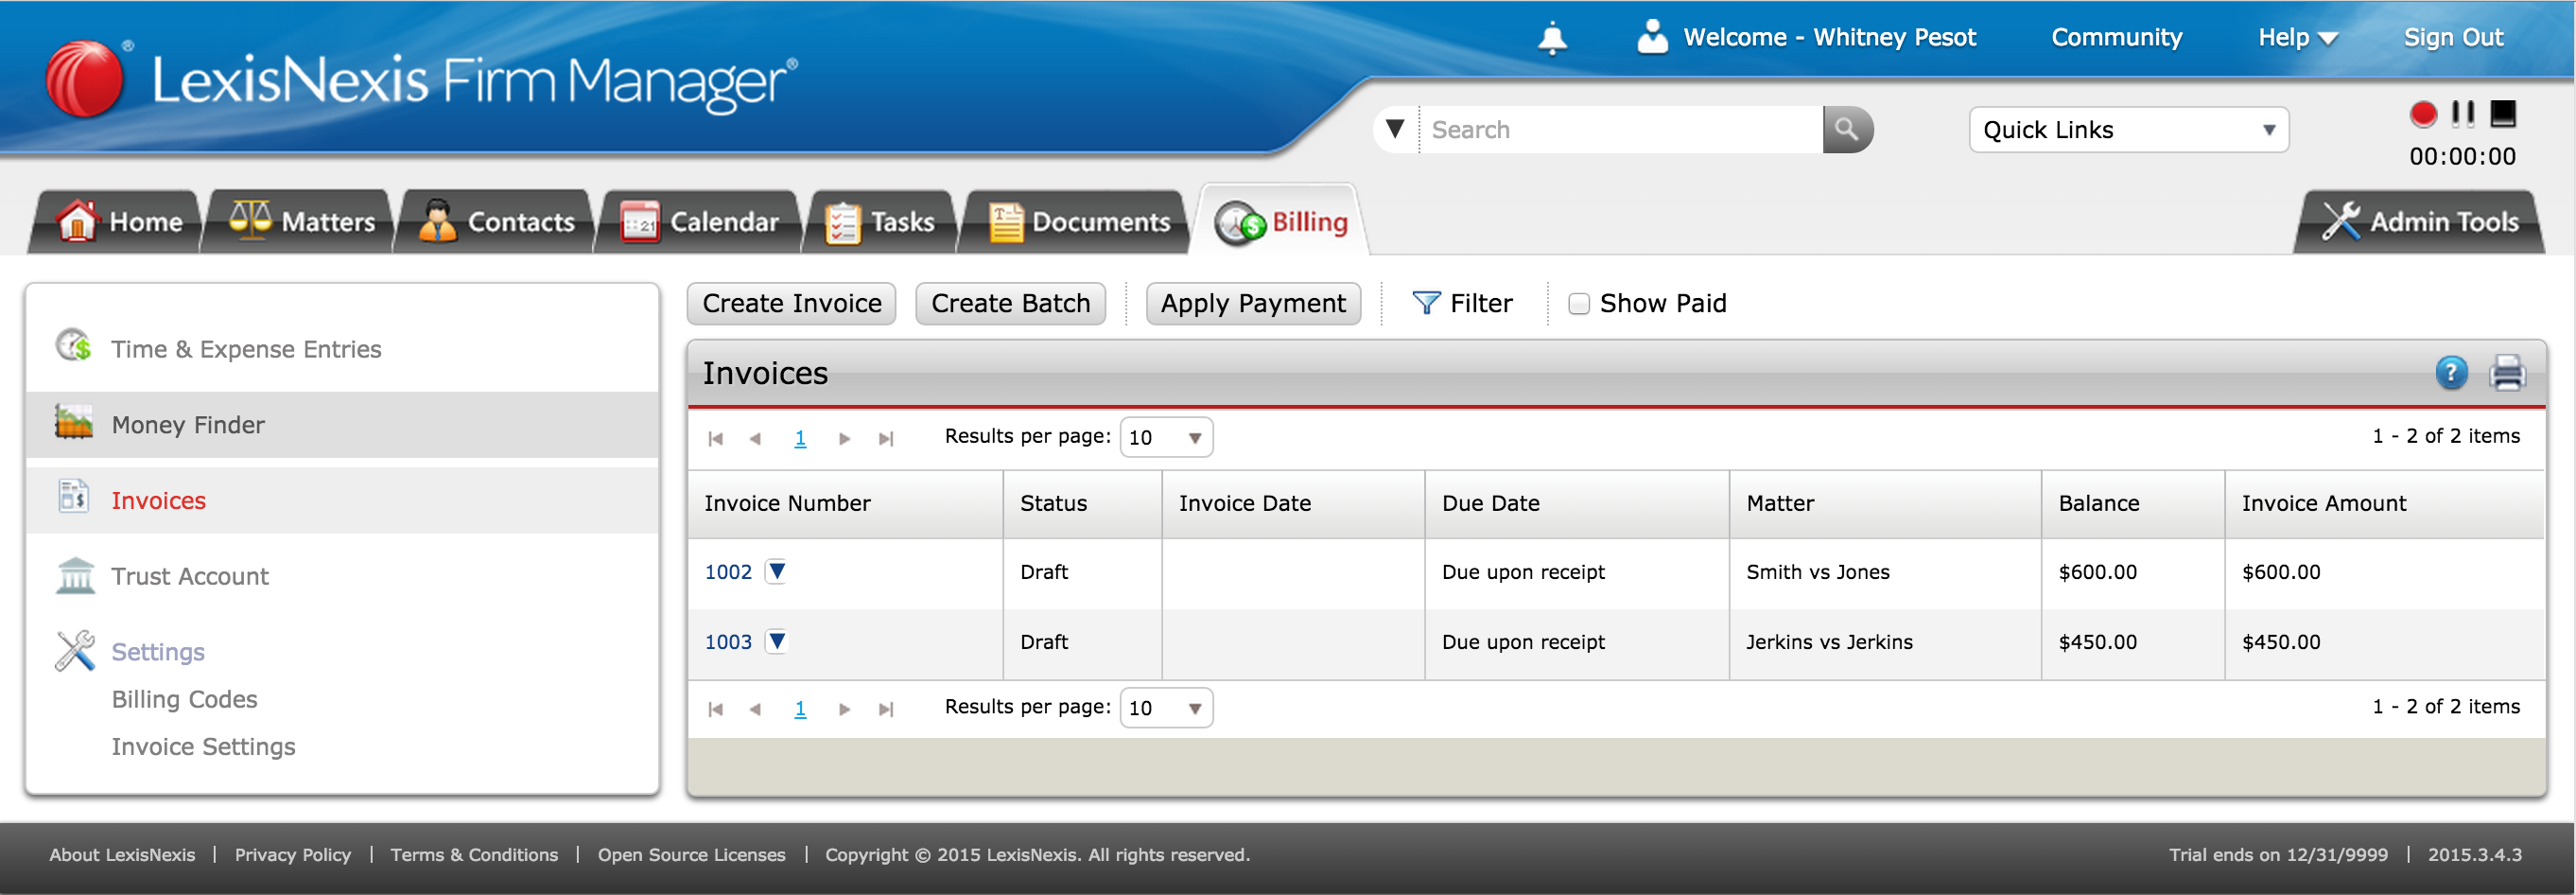 The Firm Manager product uses a “wizard” style tool to guide attorneys through the process of creating a batch of invoices.  This enables a law firm to establish a regular billing cycle to prepare all